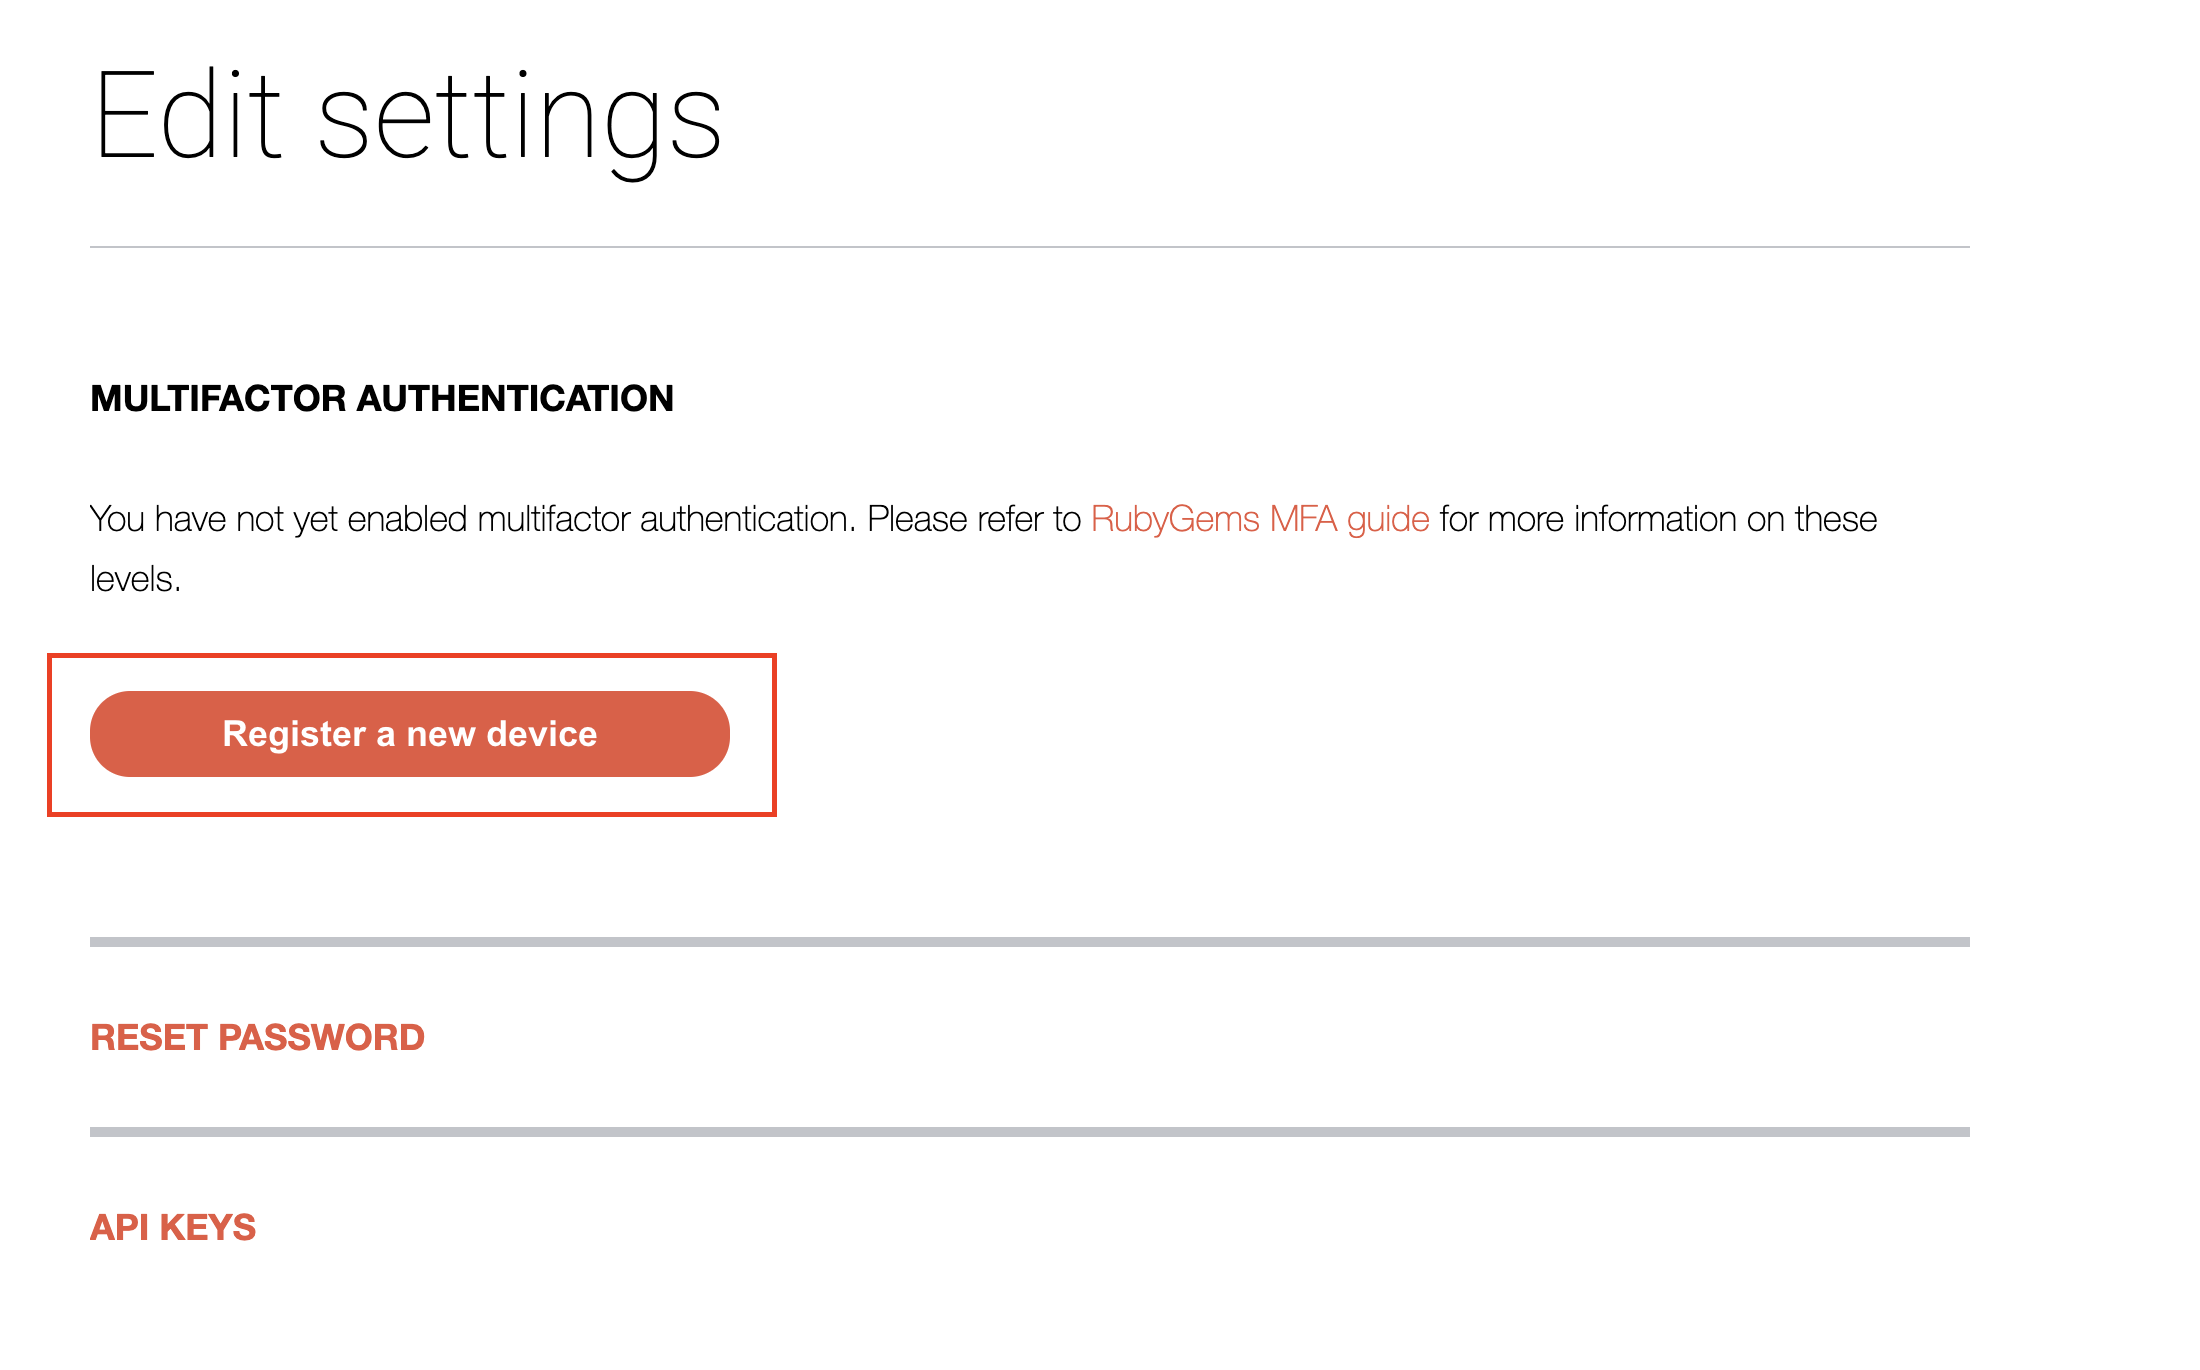 Multi-factor authentication section on the edit settings page